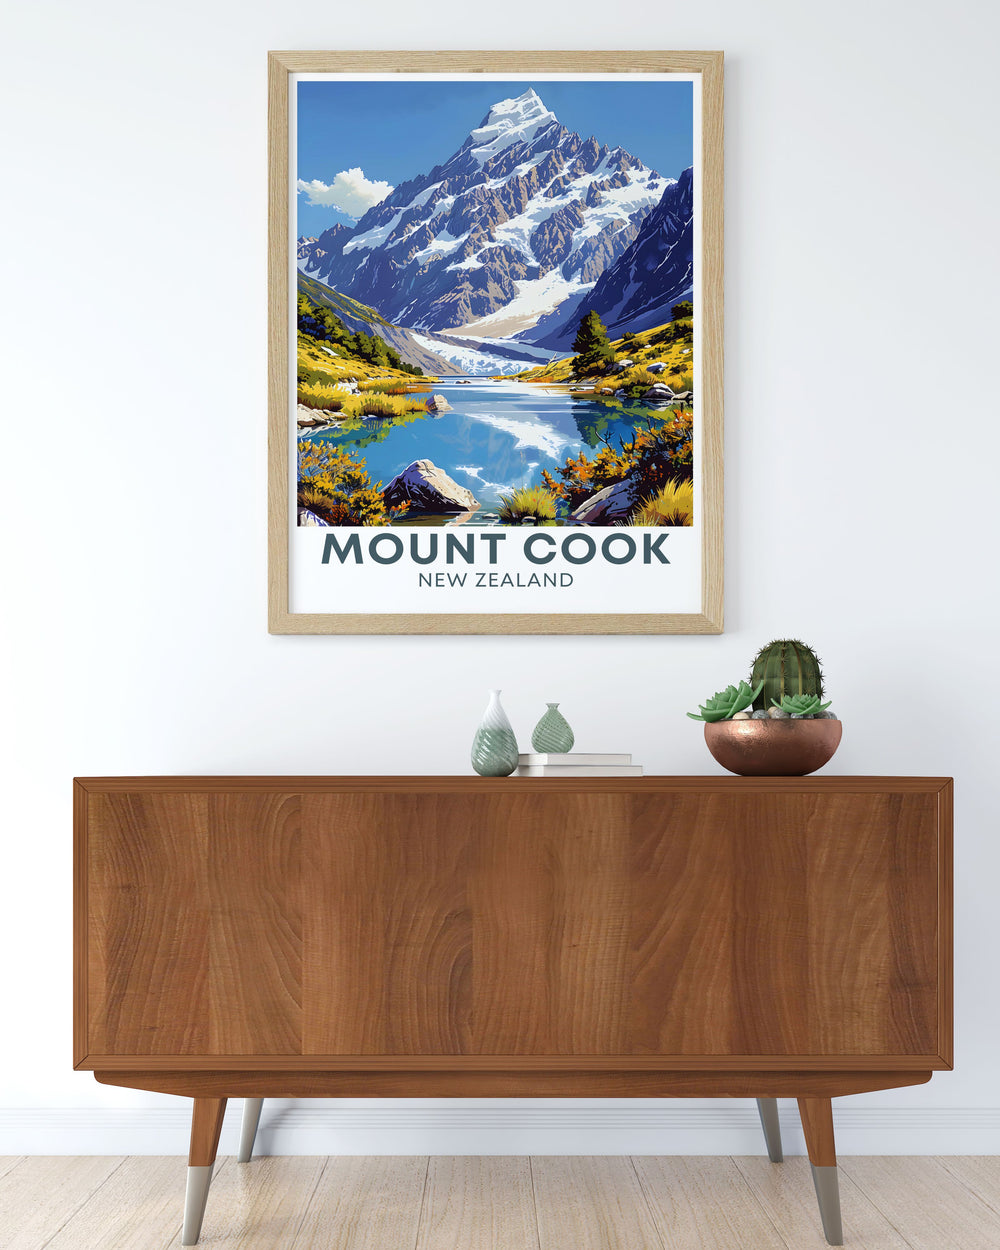 Beautiful Hooker Valley Track prints capturing the breathtaking landscapes of South Island NZ these New Zealand wall art pieces are ideal for nature enthusiasts and those seeking unique and captivating home decor inspired by iconic natural landmarks